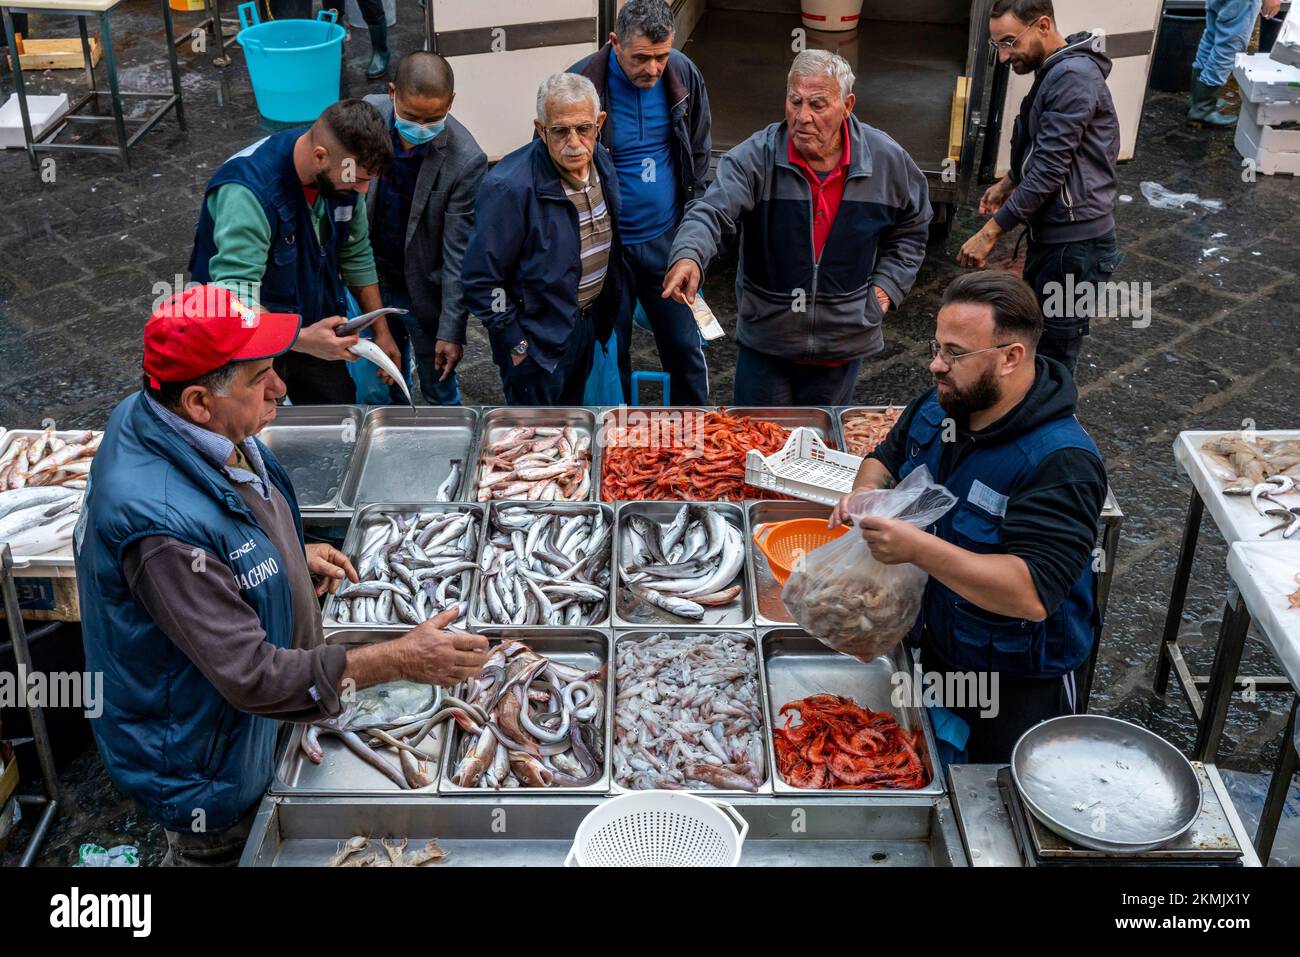 Fresh Fish/Seafood For Sale At The Daily Fish Market, Catania, Sicily, Italy. Stock Photo